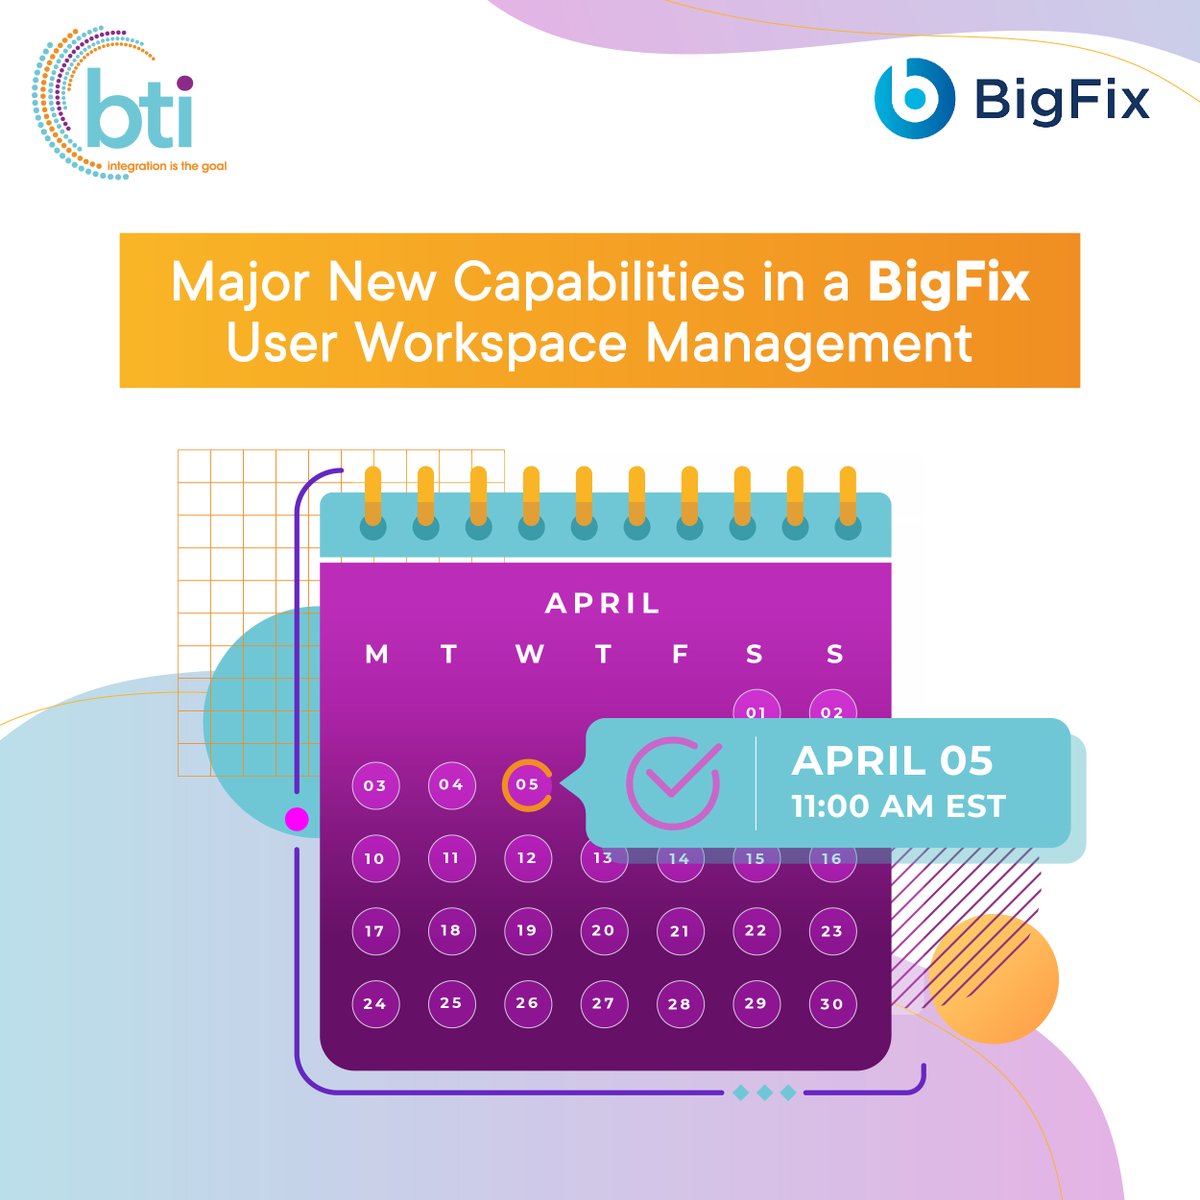 🤩 A new #HCLBigFix webinar is coming for you to understand the new capabilities of User Workspace Management.
👩🏻‍💻 One hour of totally free training from great @‌hclbigfix experts.
🔗 Register now bit.ly/40GxztD 

#Webinar #HCL #BTI #ITSolutions #CyberSecurity #C ...